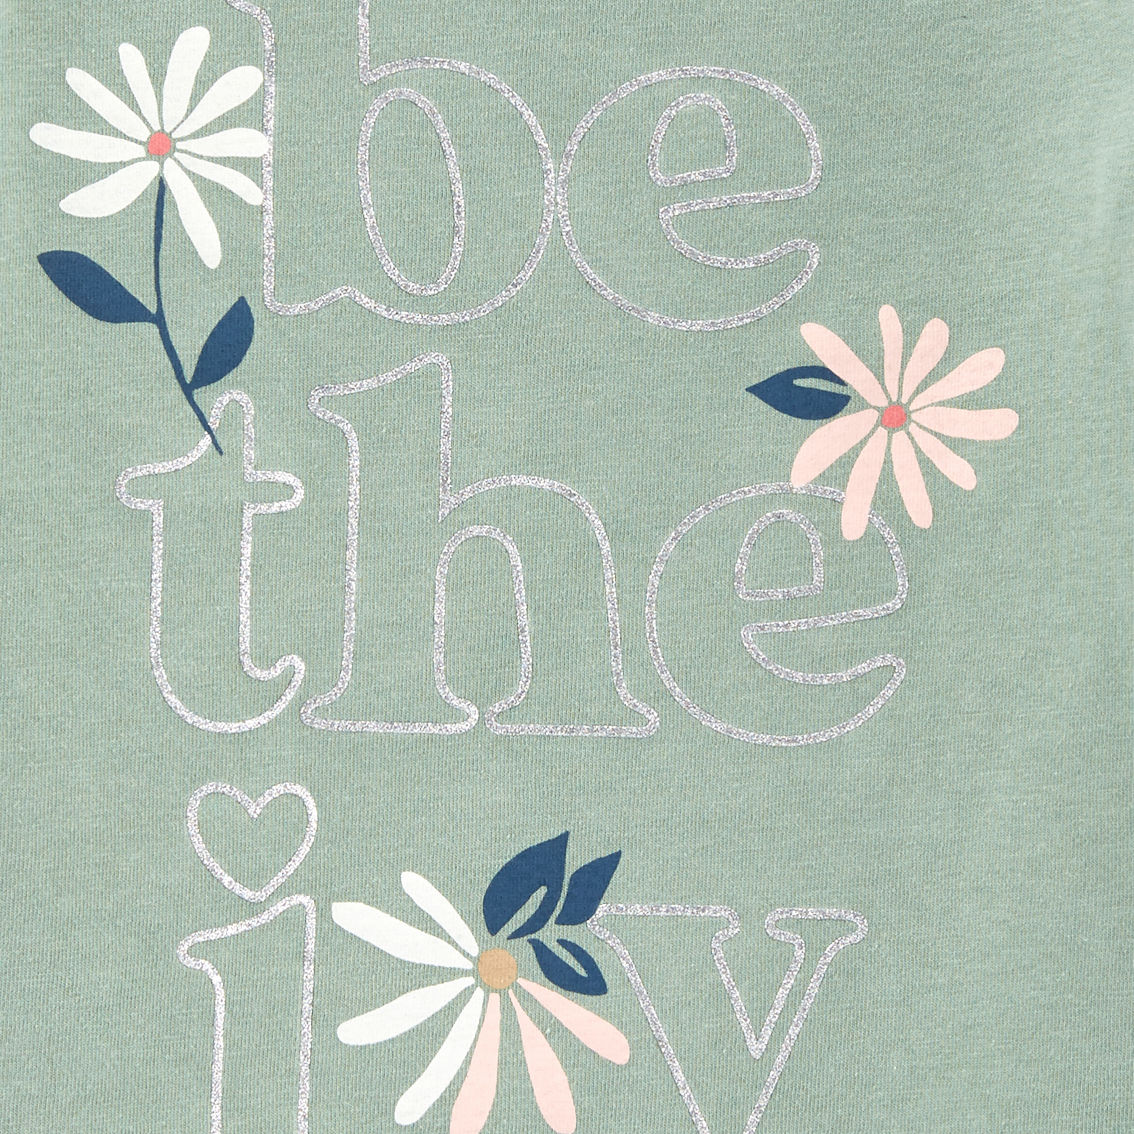 Carter's Toddler Girls Be the Joy Graphic Tee - Image 2 of 2